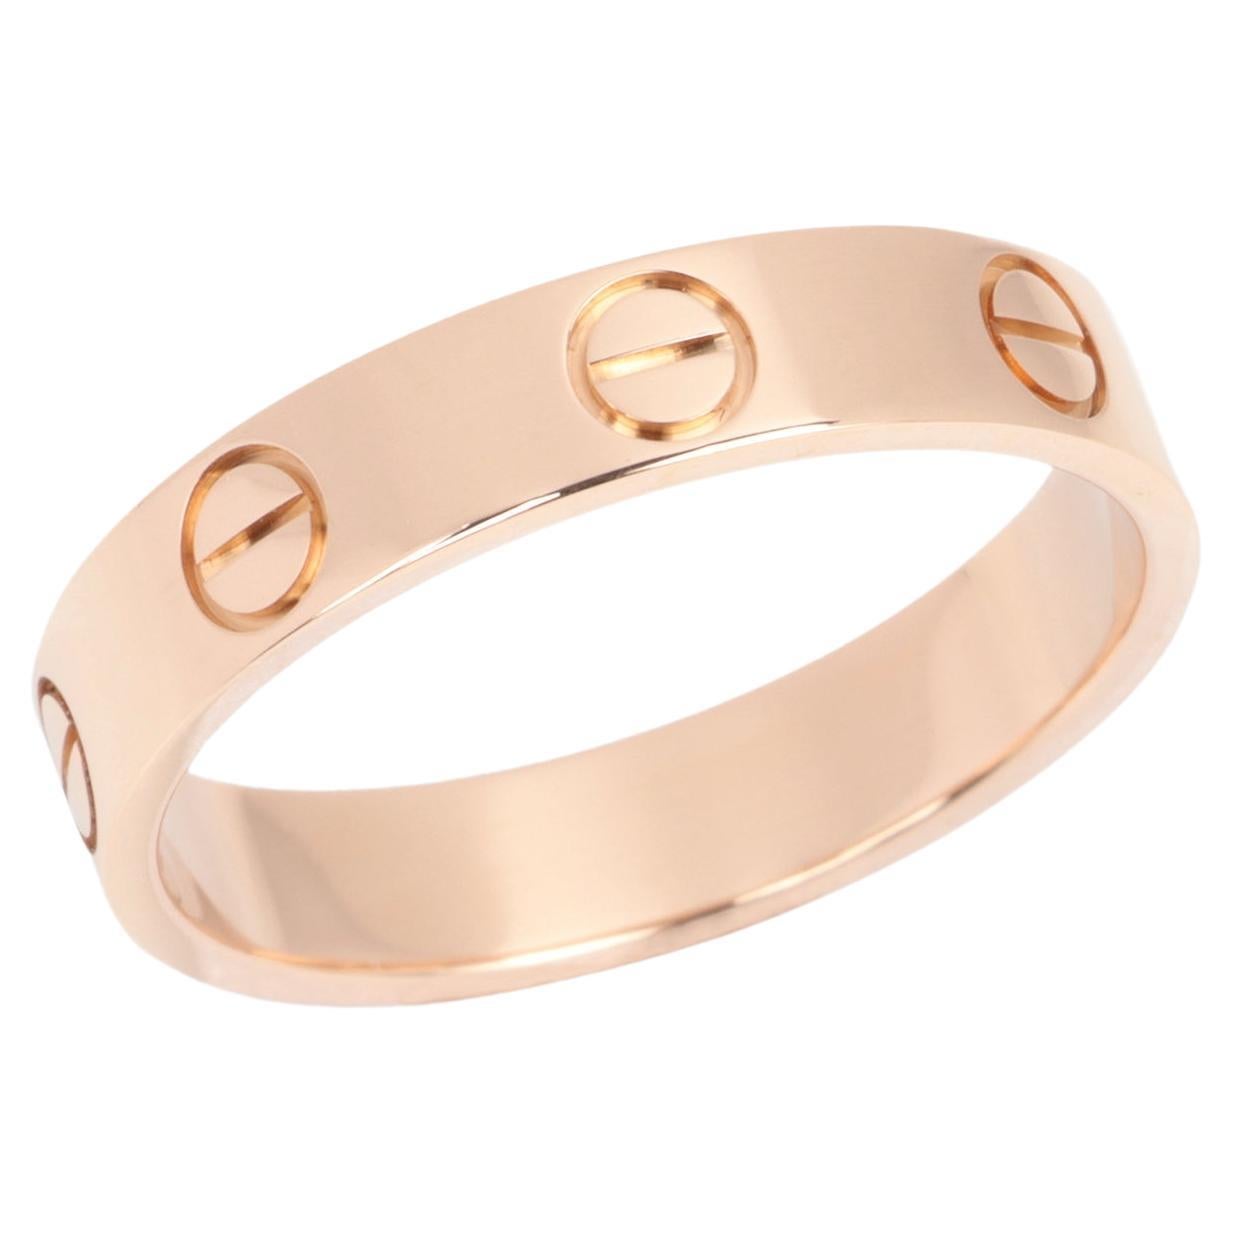 Cartier 18ct Rose Gold Love Wedding Band Ring